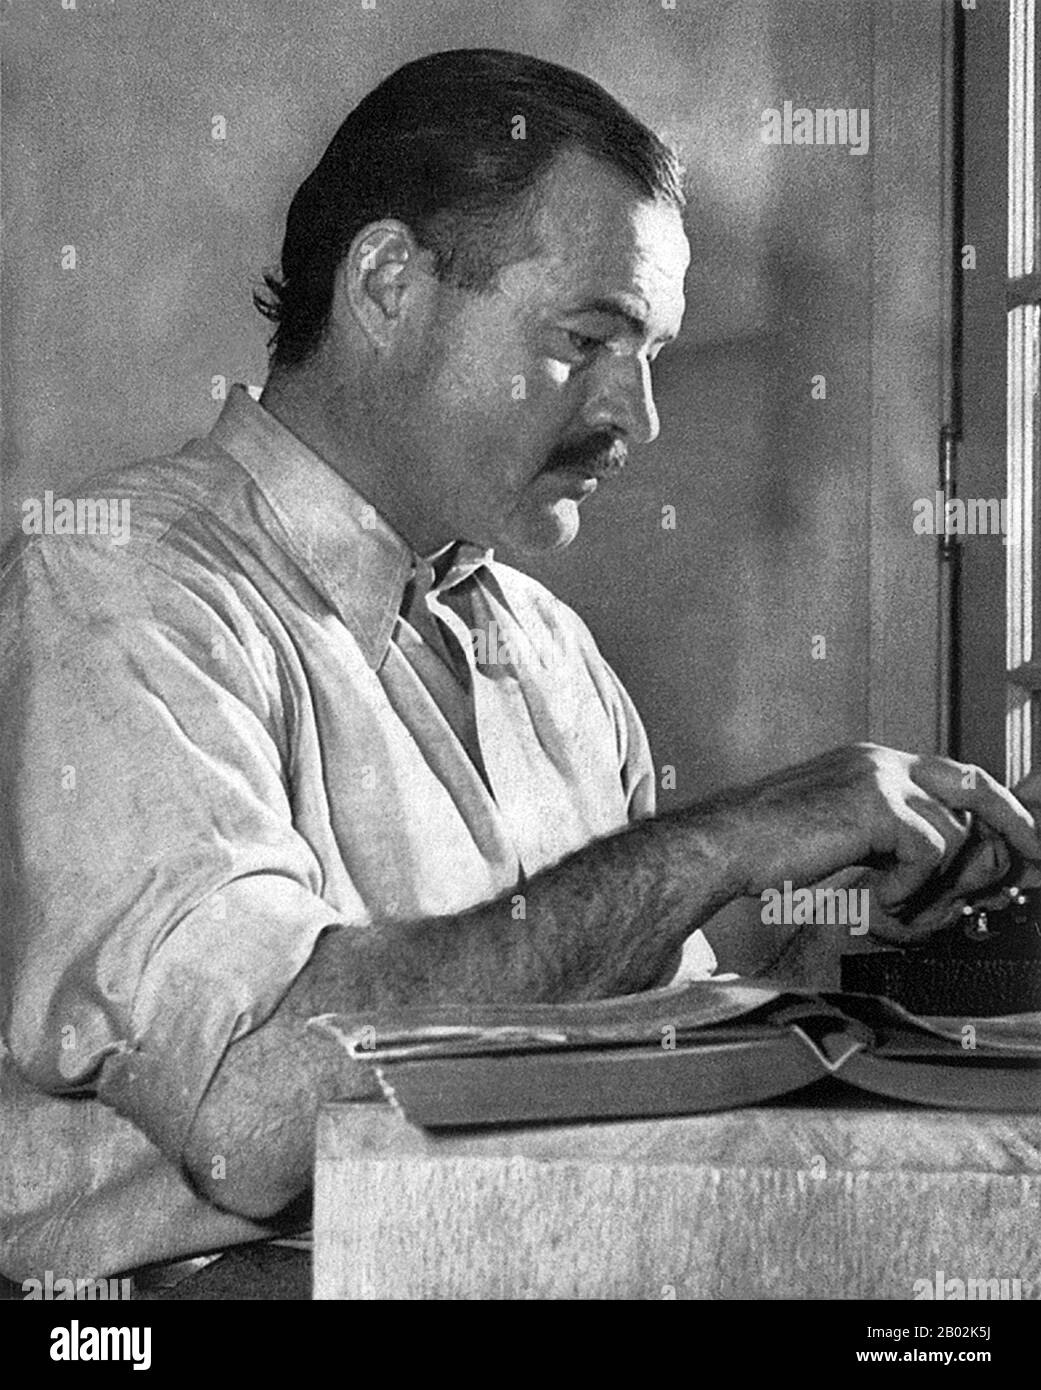 Ernest Miller Hemingway (July 21, 1899 – July 2, 1961) was an American author and journalist. His economical and understated style had a strong influence on 20th-century fiction, while his life of adventure and his public image influenced later generations. Hemingway produced most of his work between the mid-1920s and the mid-1950s, and won the Nobel Prize in Literature in 1954.  He published seven novels, six short story collections, and two non-fiction works. Additional works, including three novels, four short story collections, and three non-fiction works, were published posthumously. Many Stock Photo